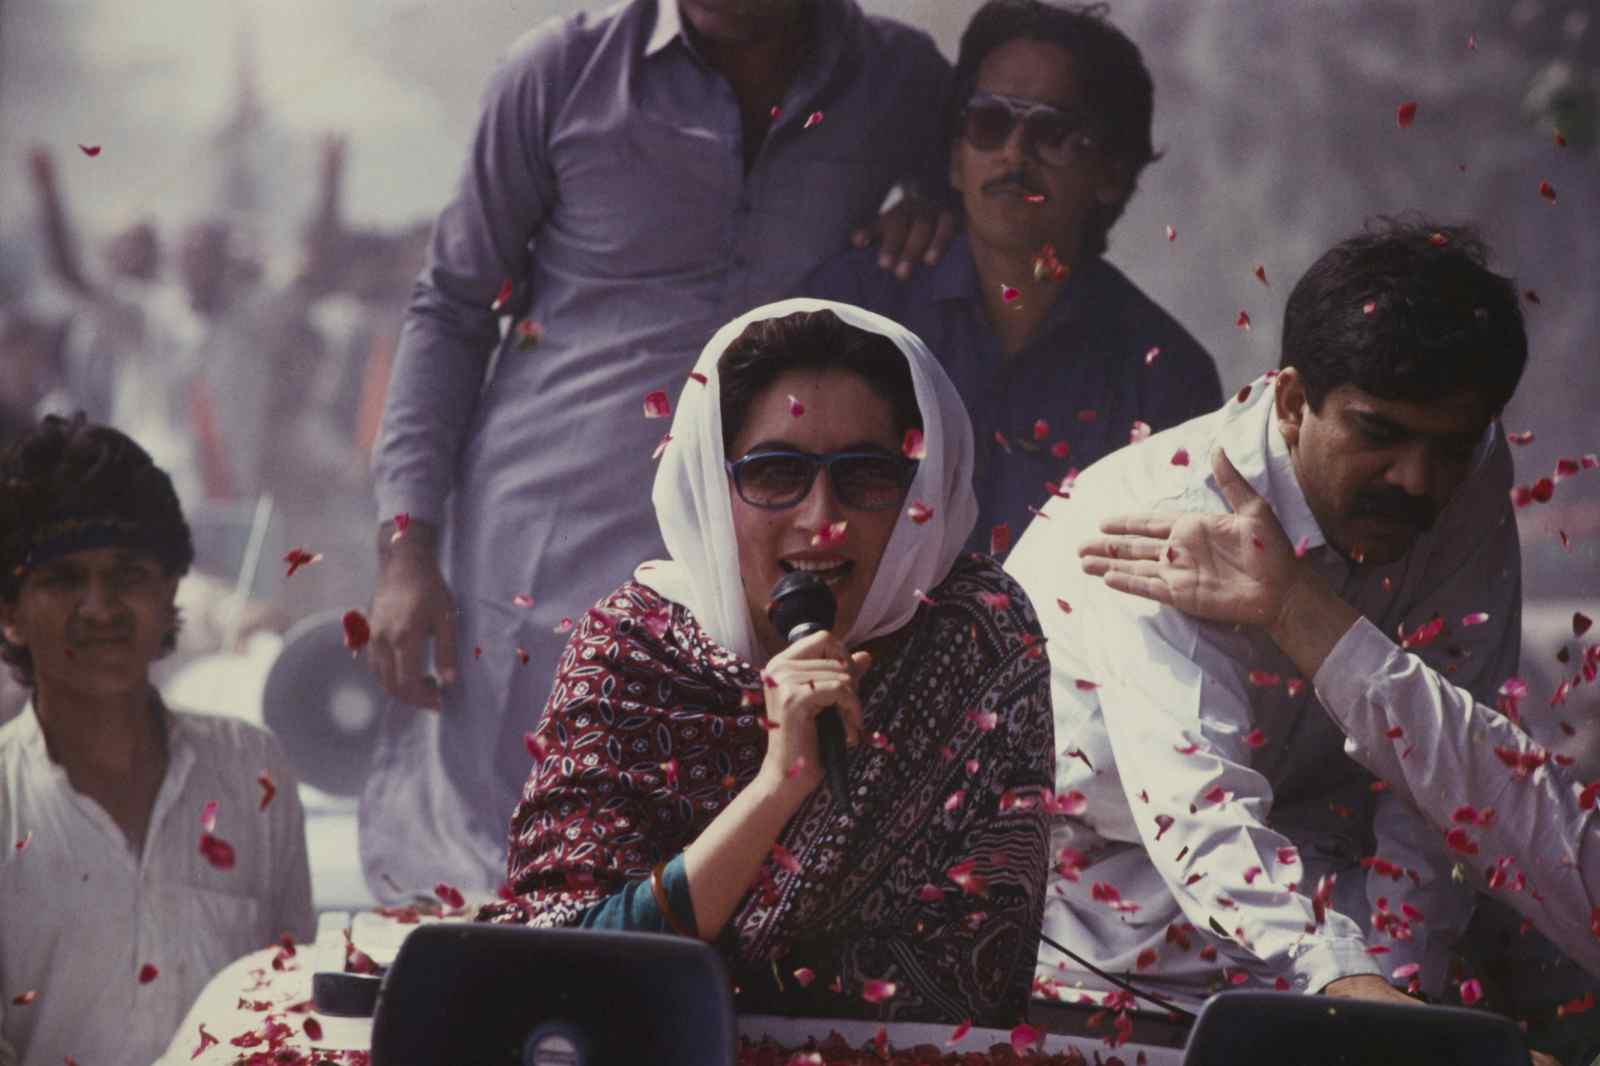 Benazir Bhutto campaigning for the Pakistan People's Party (PPP) the week before general elections, October 15-16, 1990 (Derek Hudson/Getty Images)